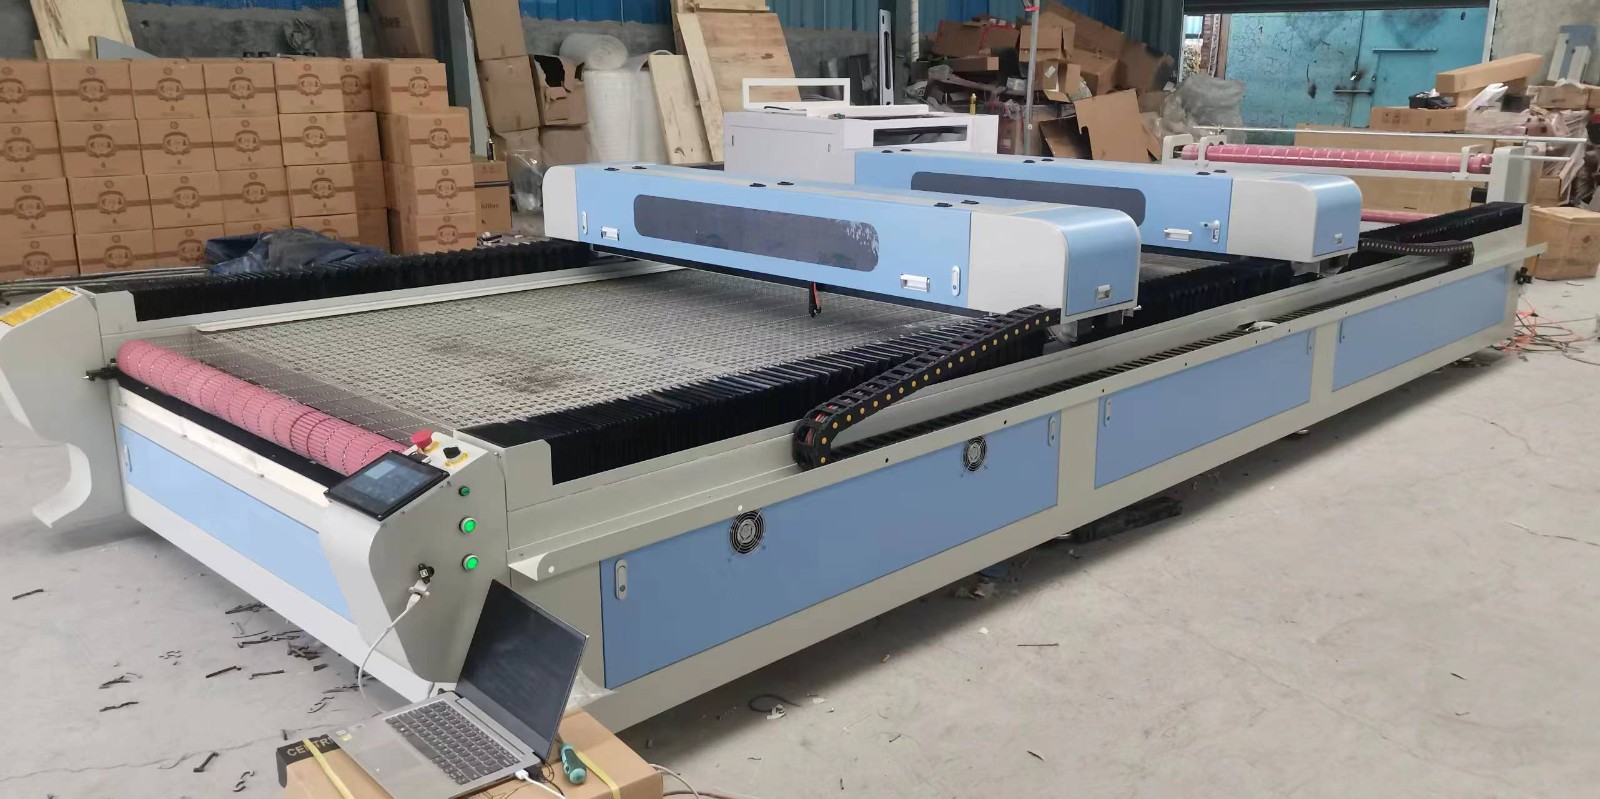 Two-headed Asynchronous Laser Cutting Machine